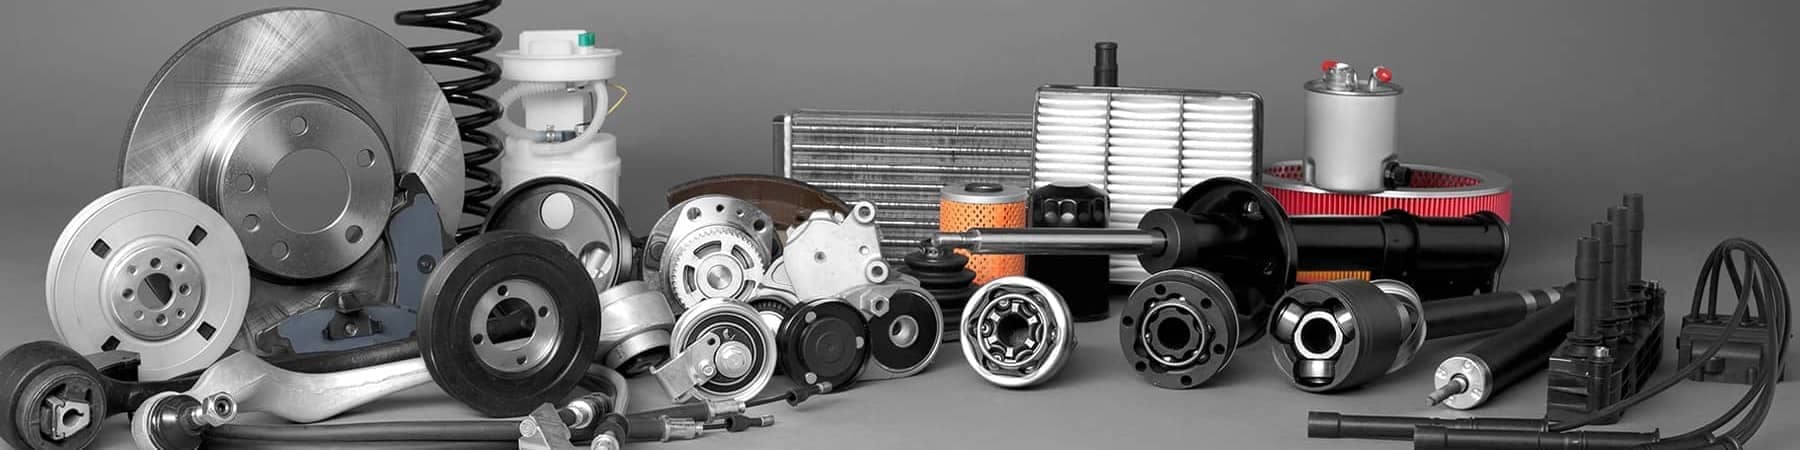 Various-Car-Parts-on-Grey-Background